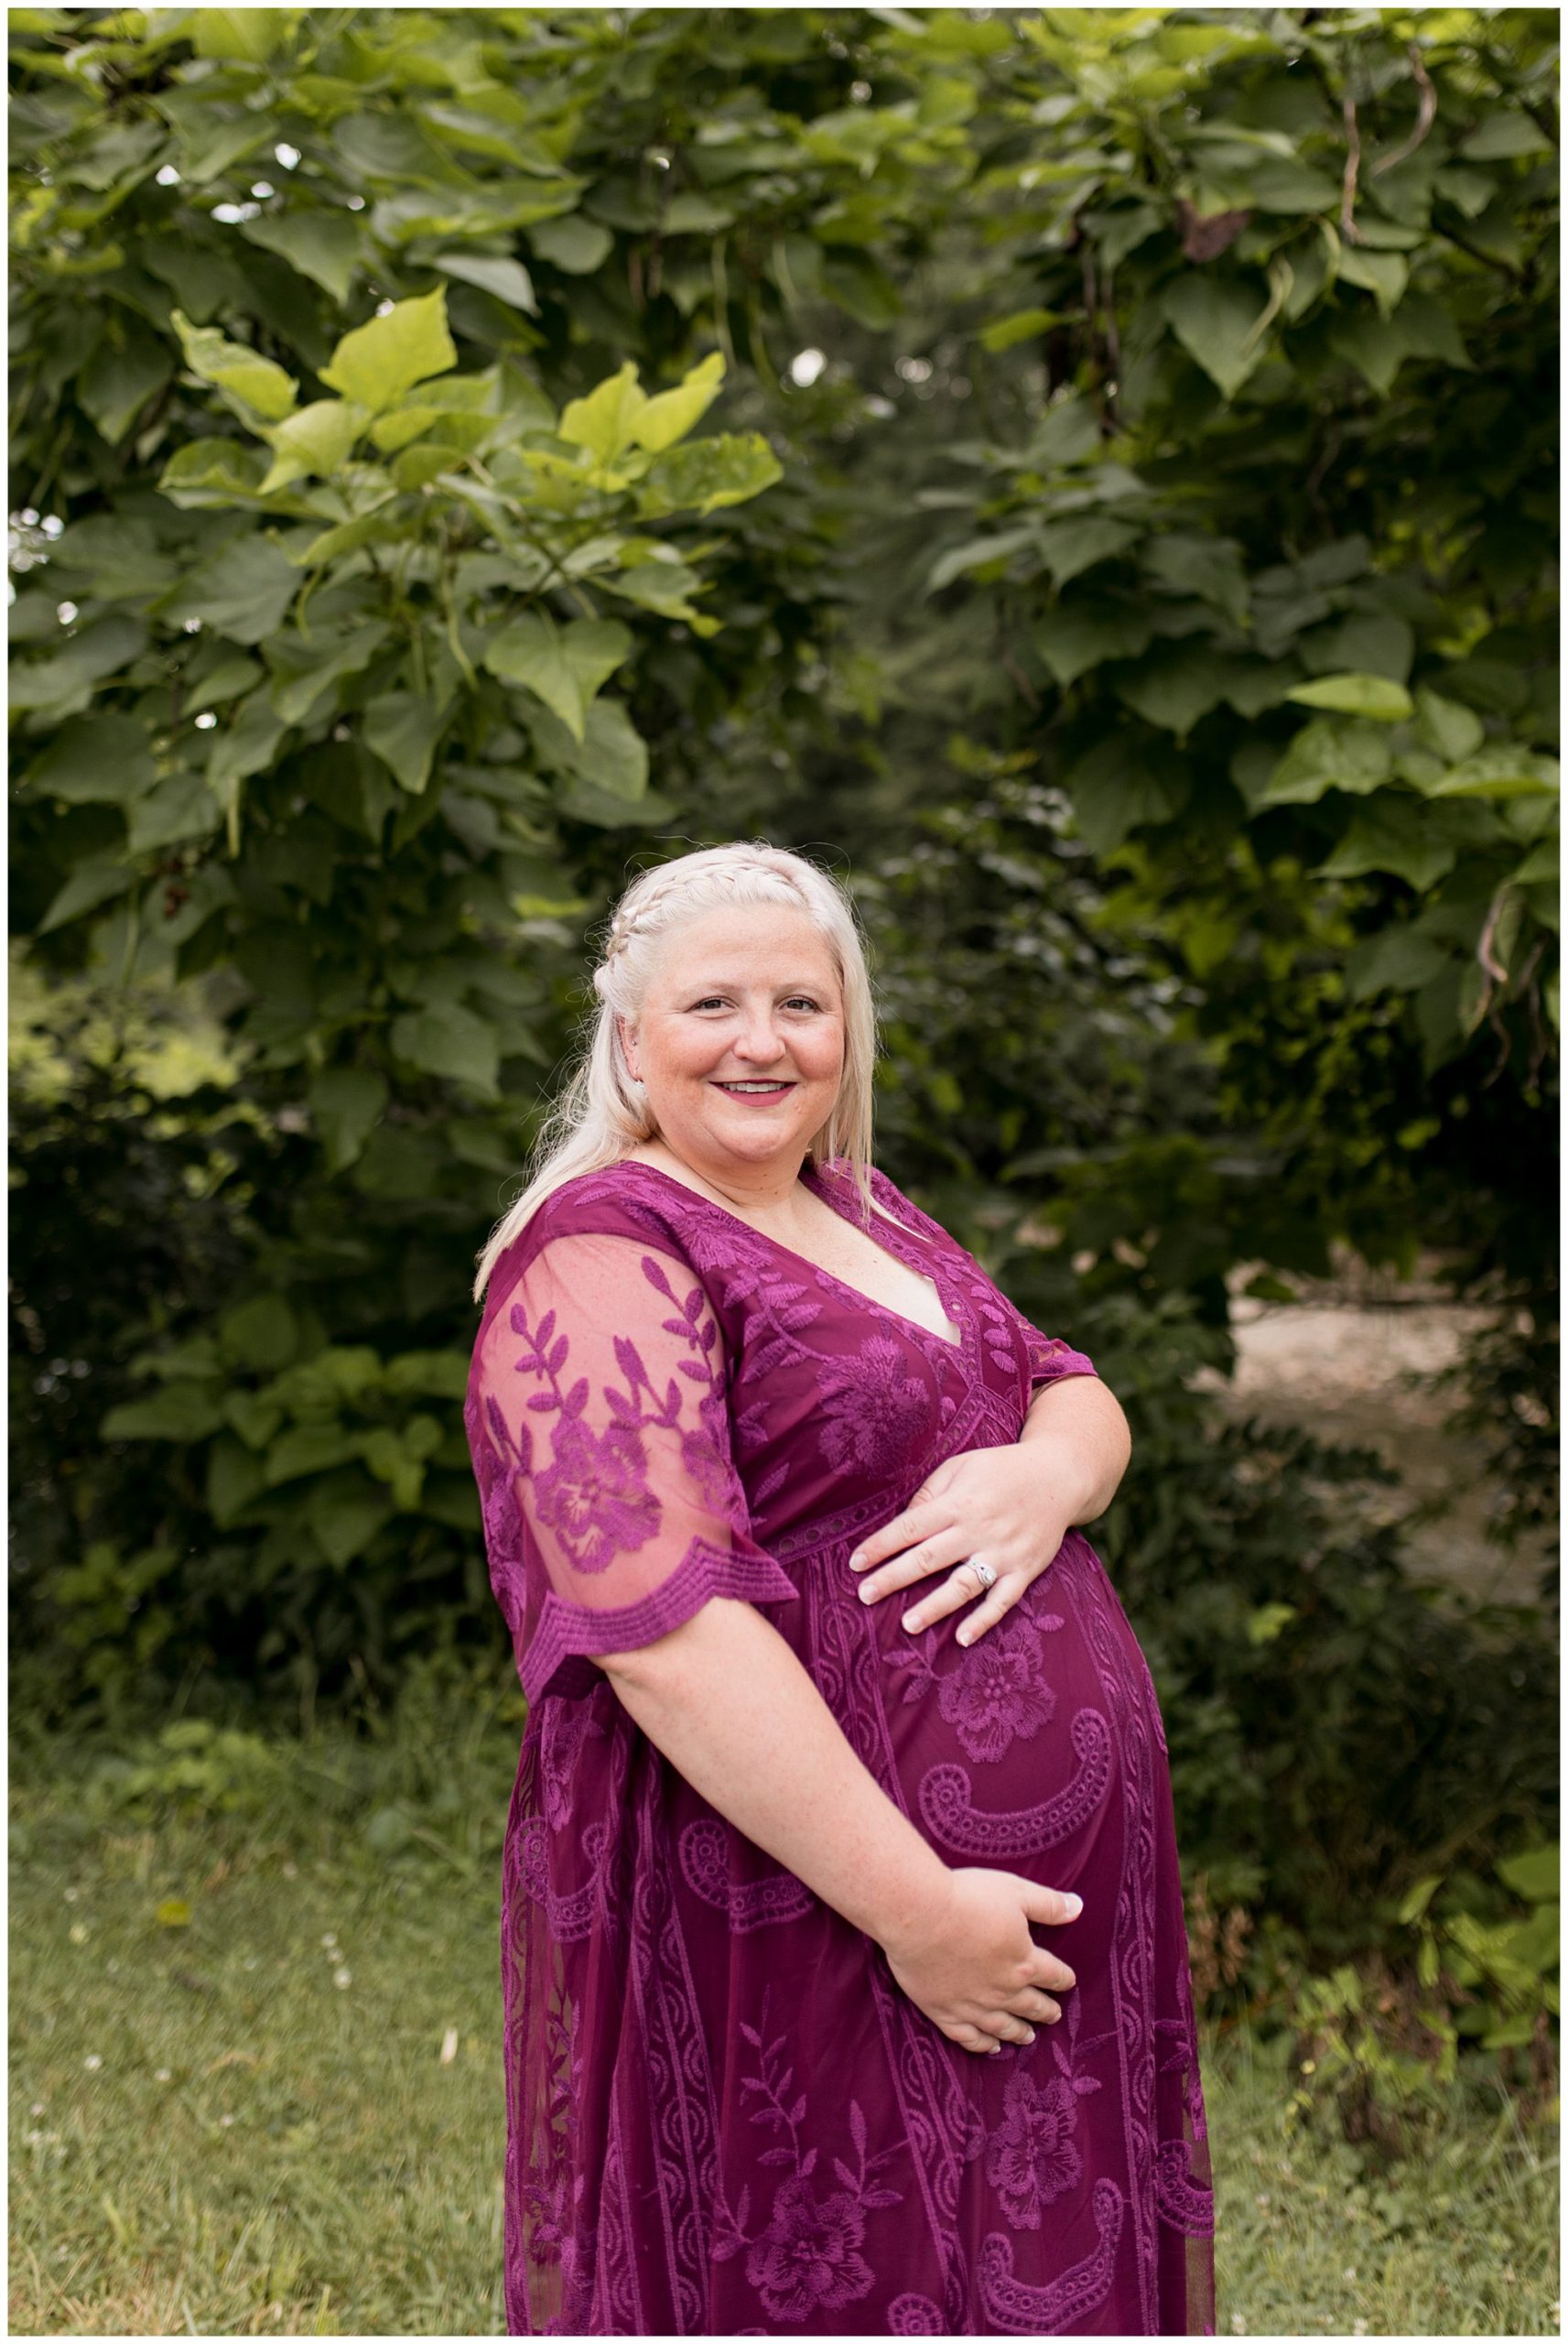 Muncie Indiana maternity session at Morrow's Meadow Park